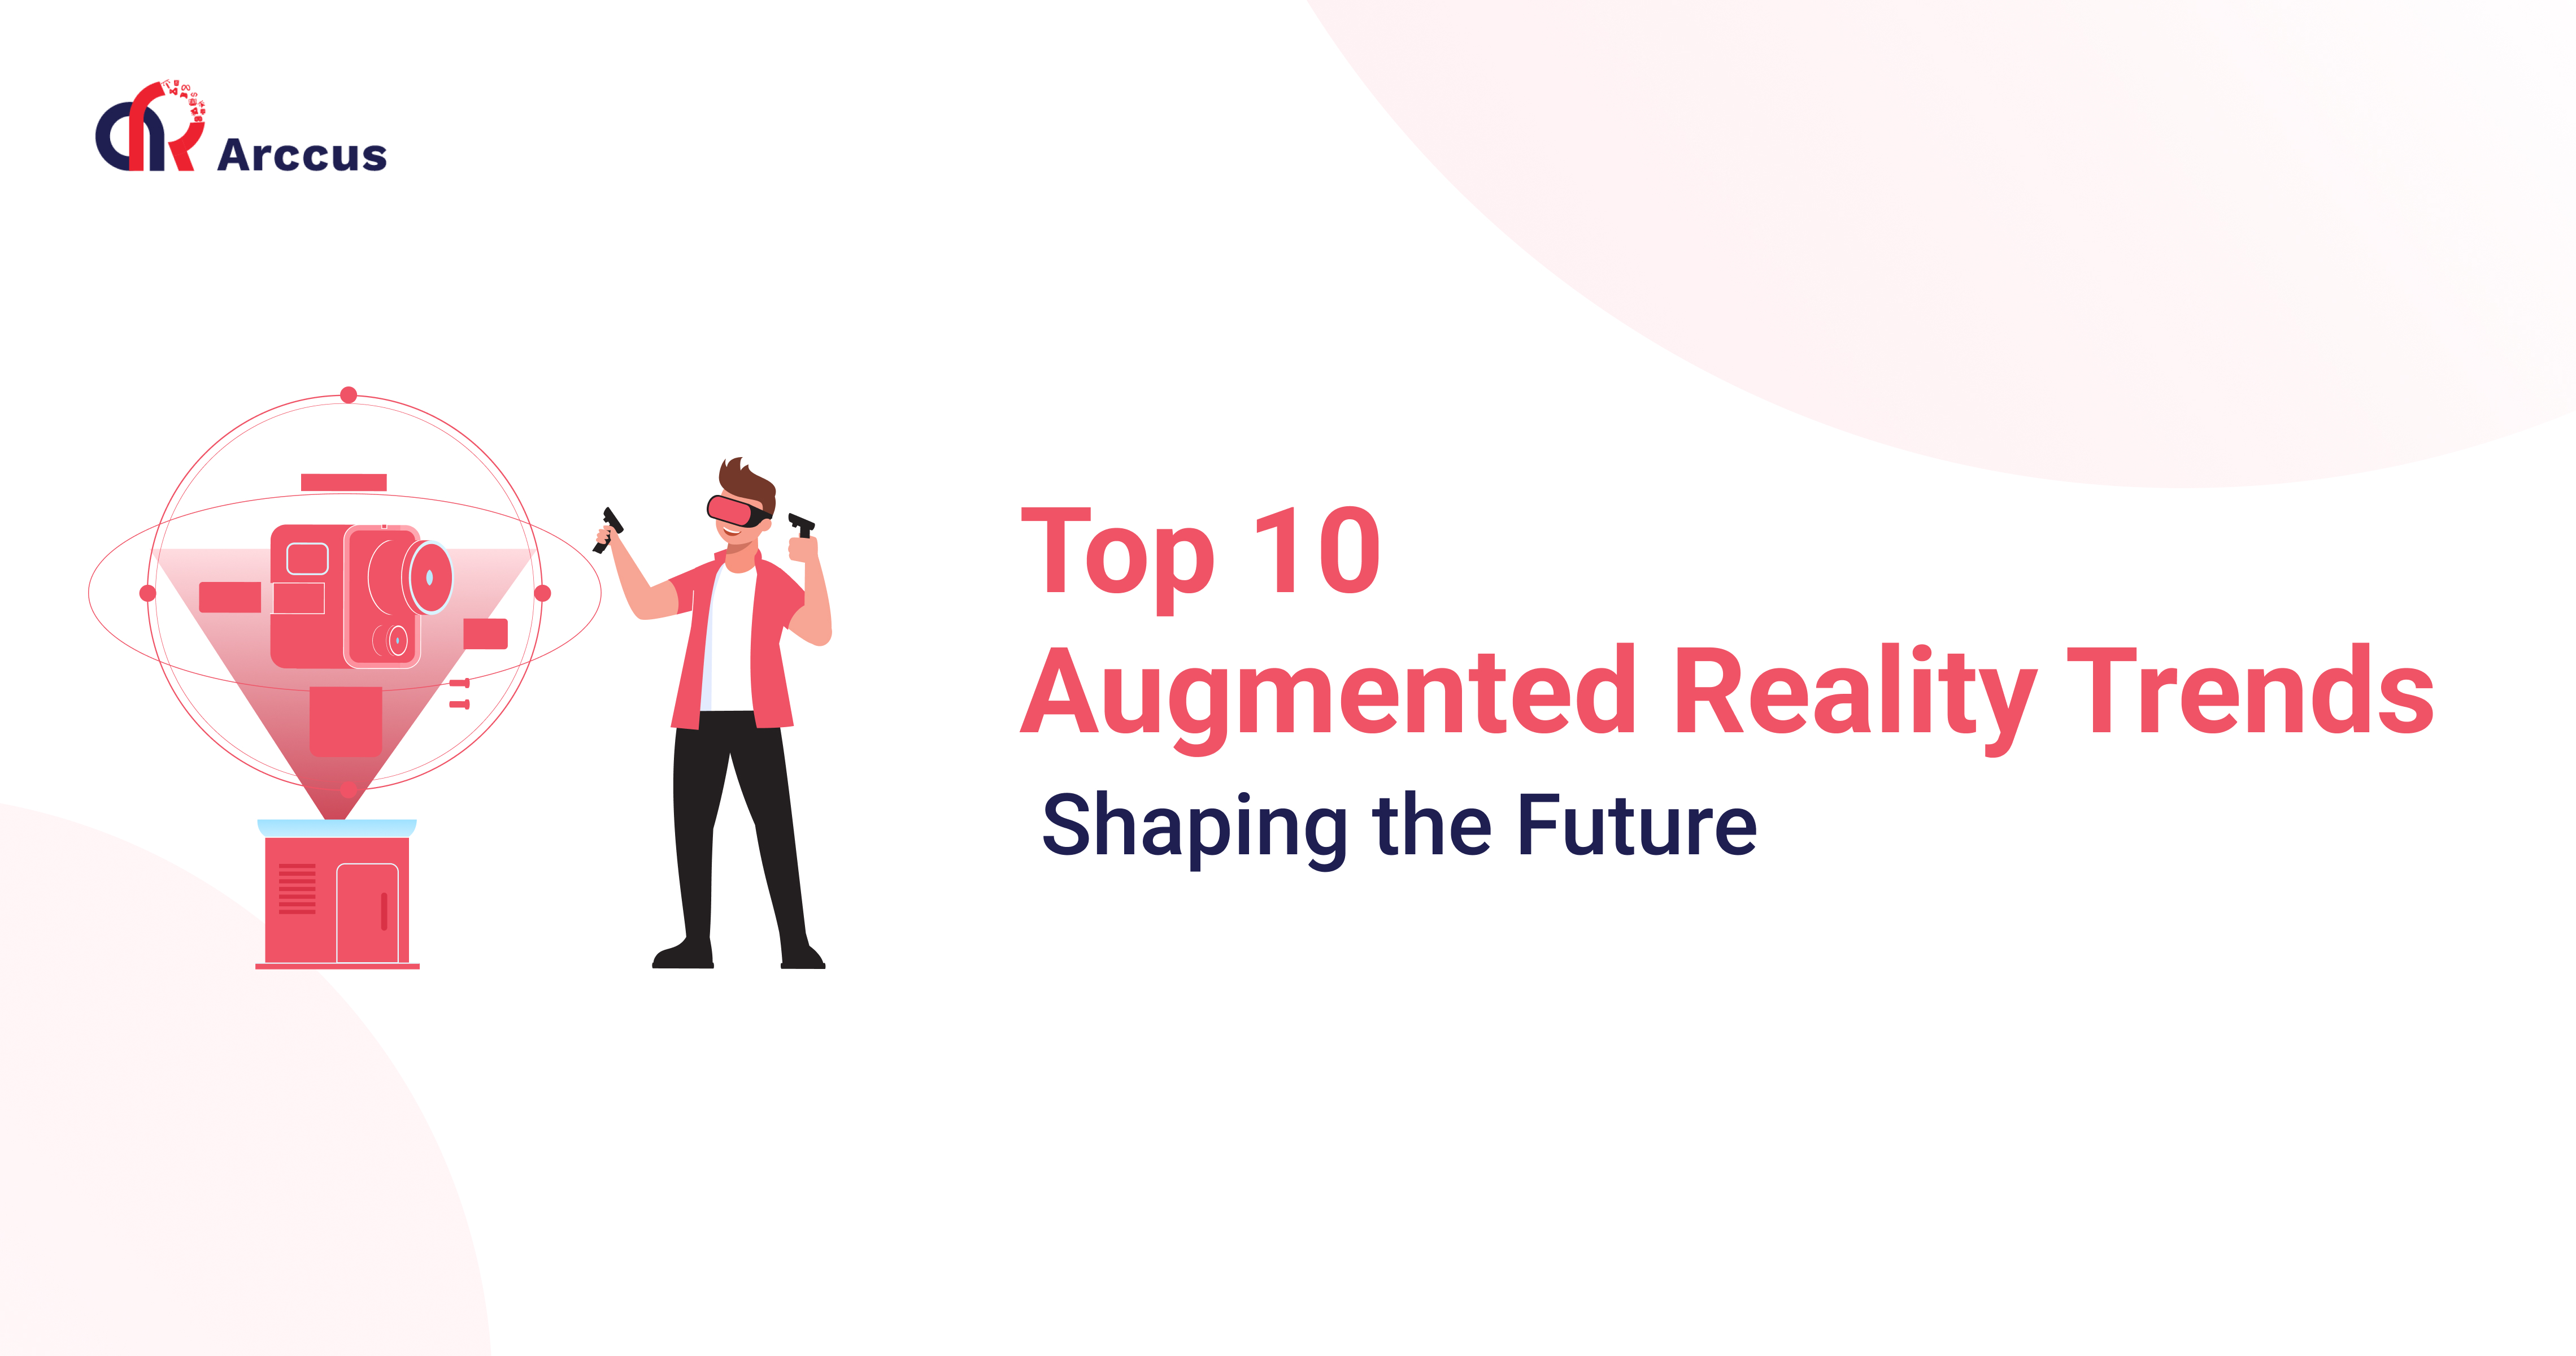 Top 10 Augmented Reality Trends Shaping The Future